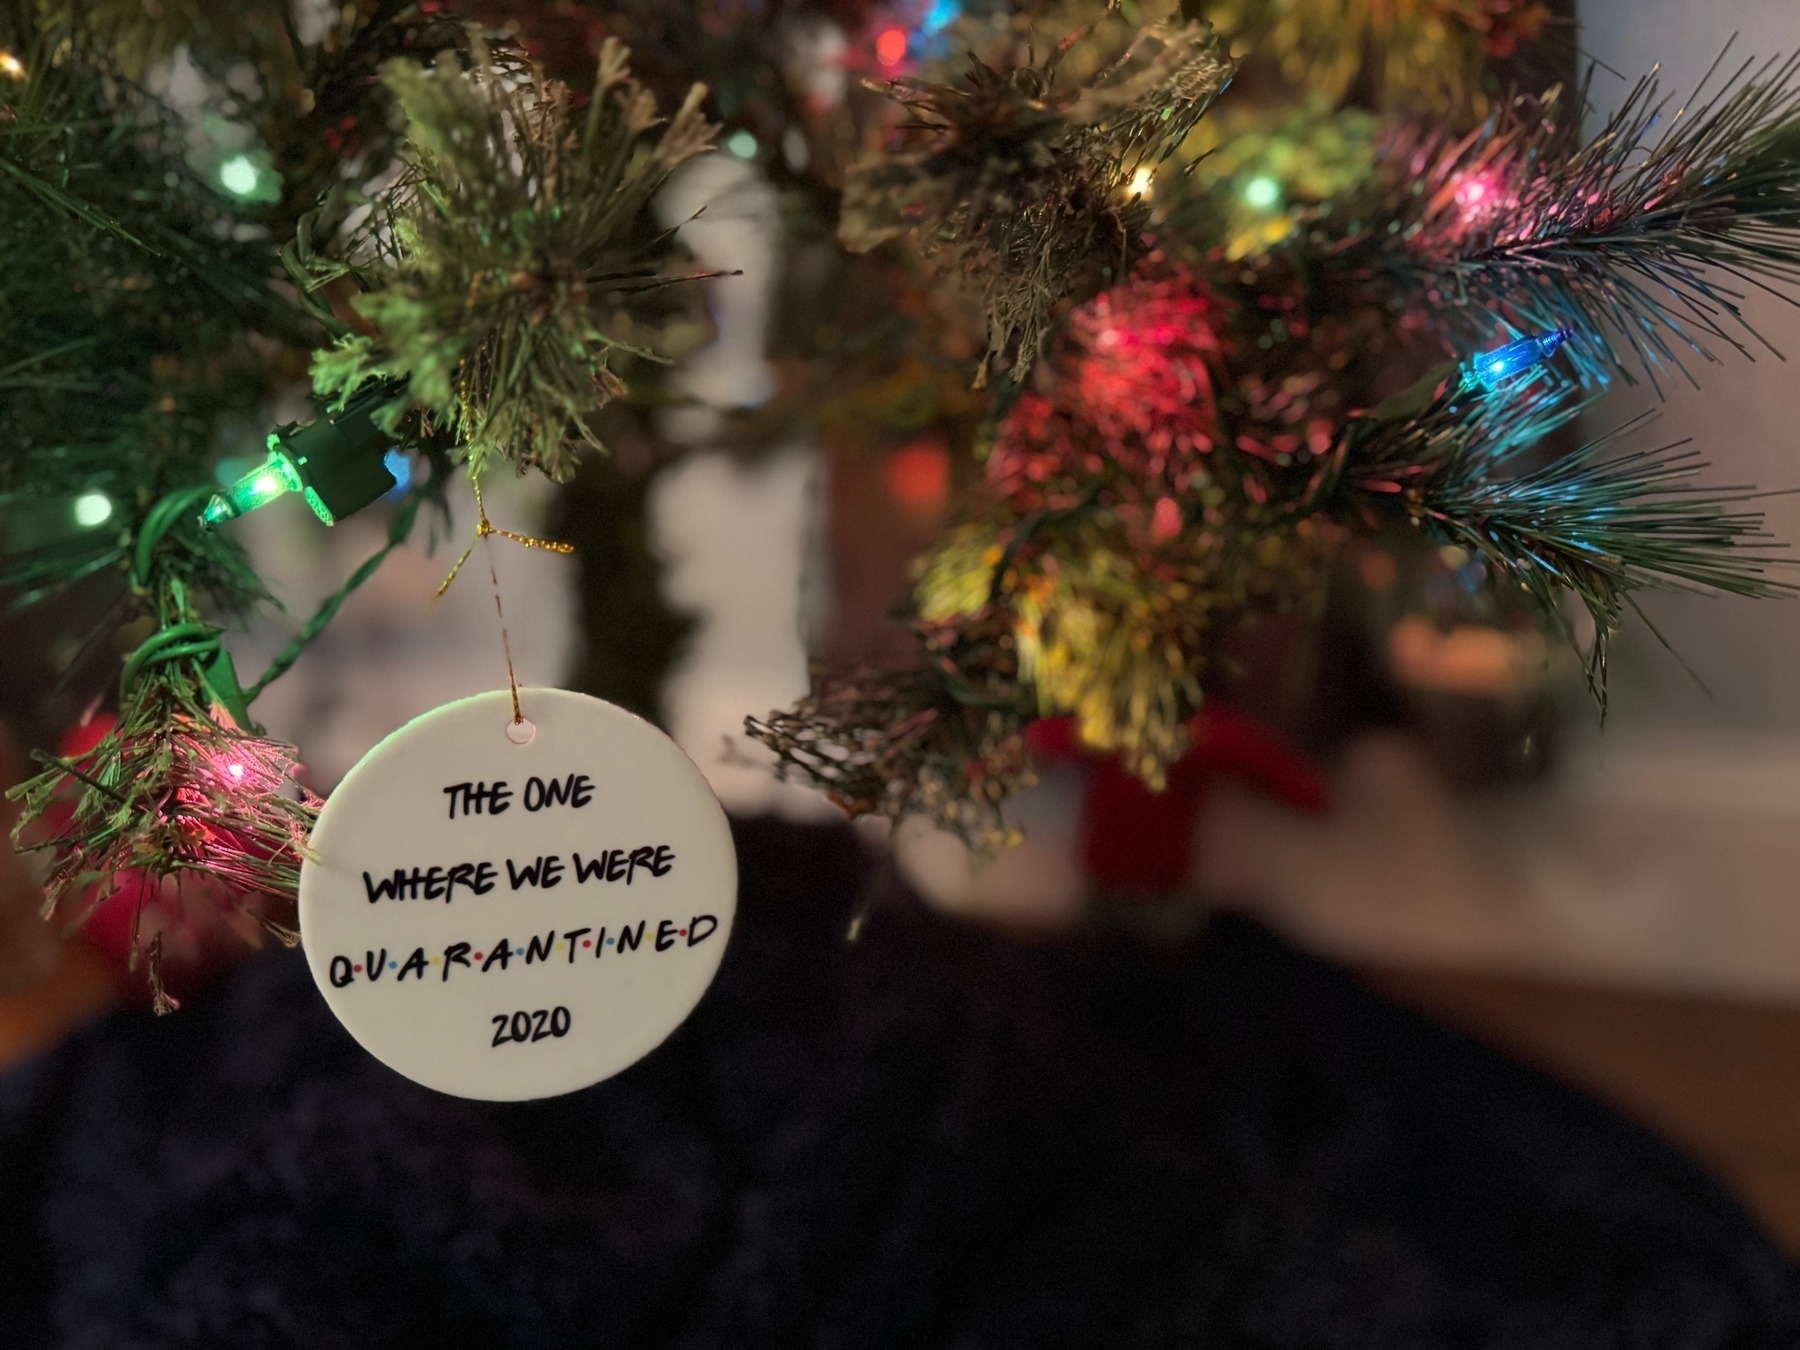 Christmas tree ornament, with colored lights in the background, hanging from the tree. The ornament is round and white, with the following verbiage in the Friends (the TV show) font: 'The one where we were all quarantined, 2020'